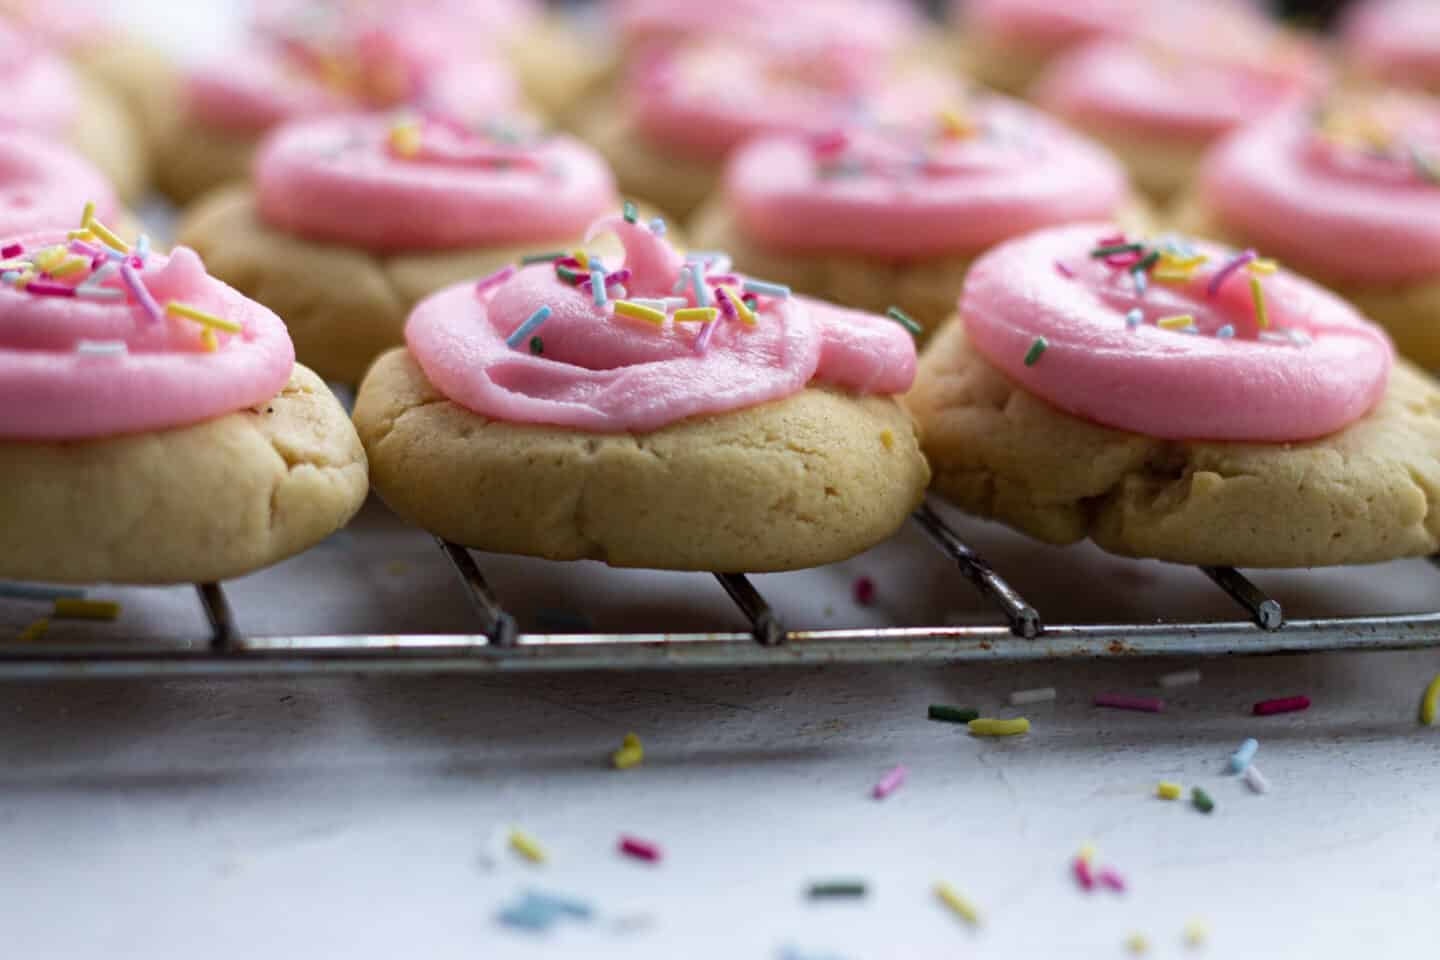 A tray of pink iced cookies